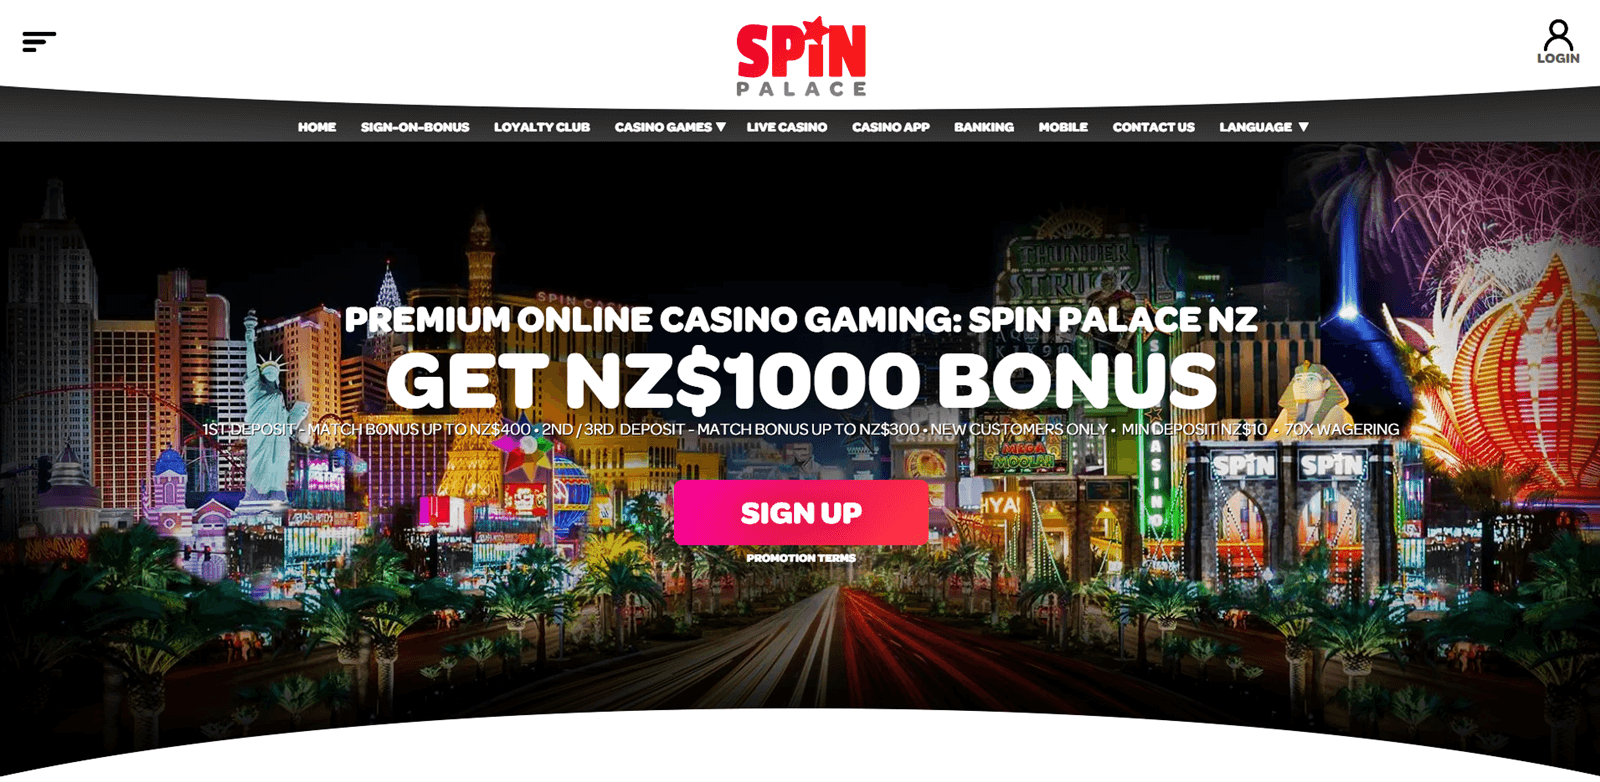 spin palace casino site nz 1